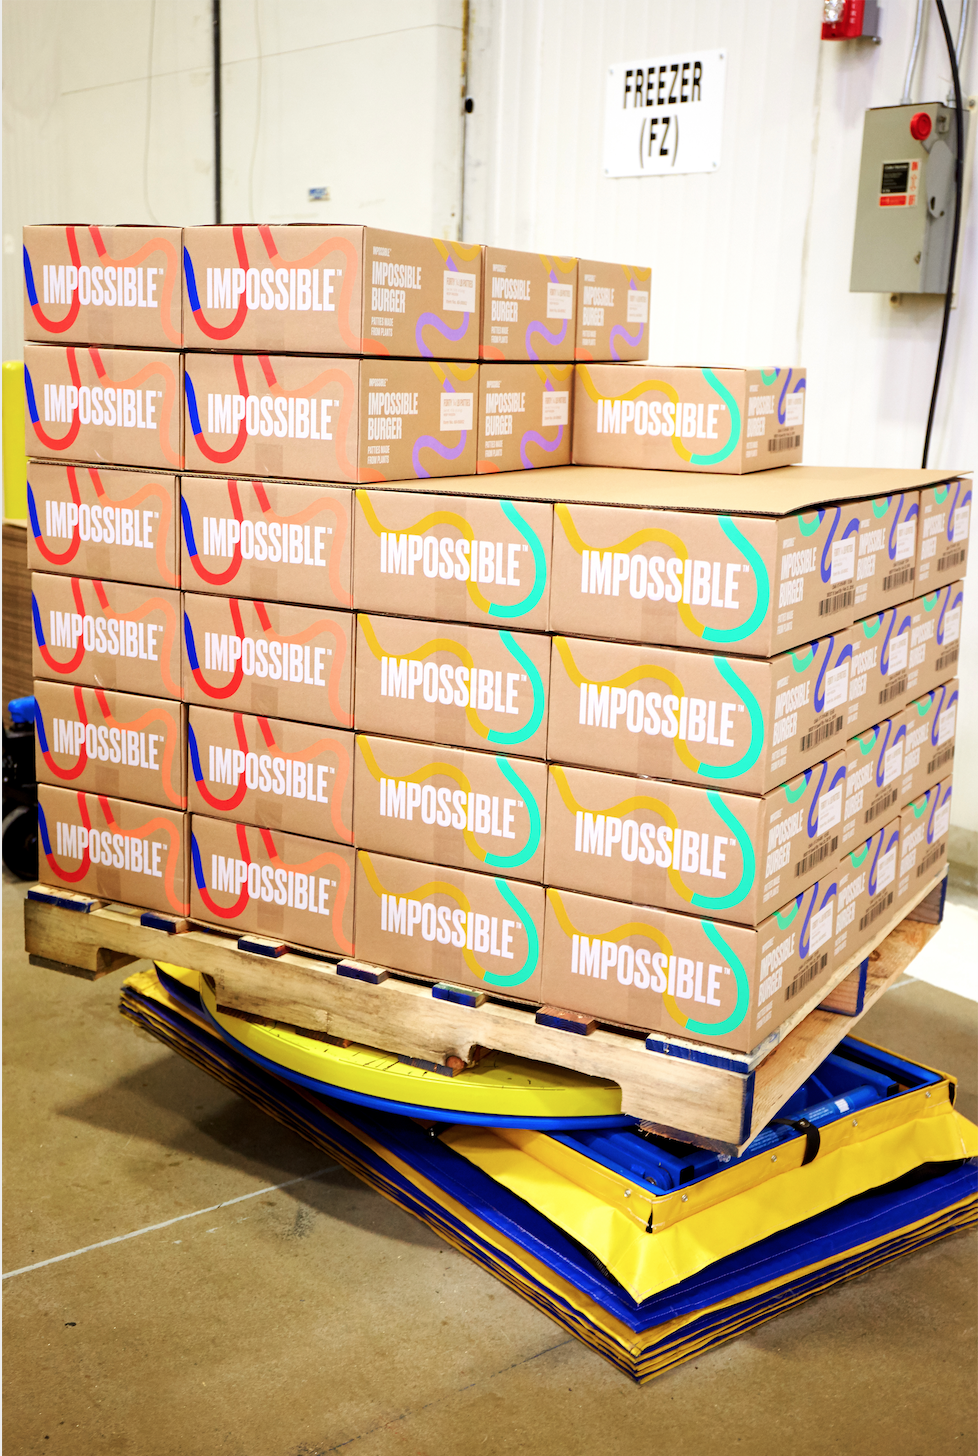 Impossible Foods Photo, image of a pallet of Impossible Foods product